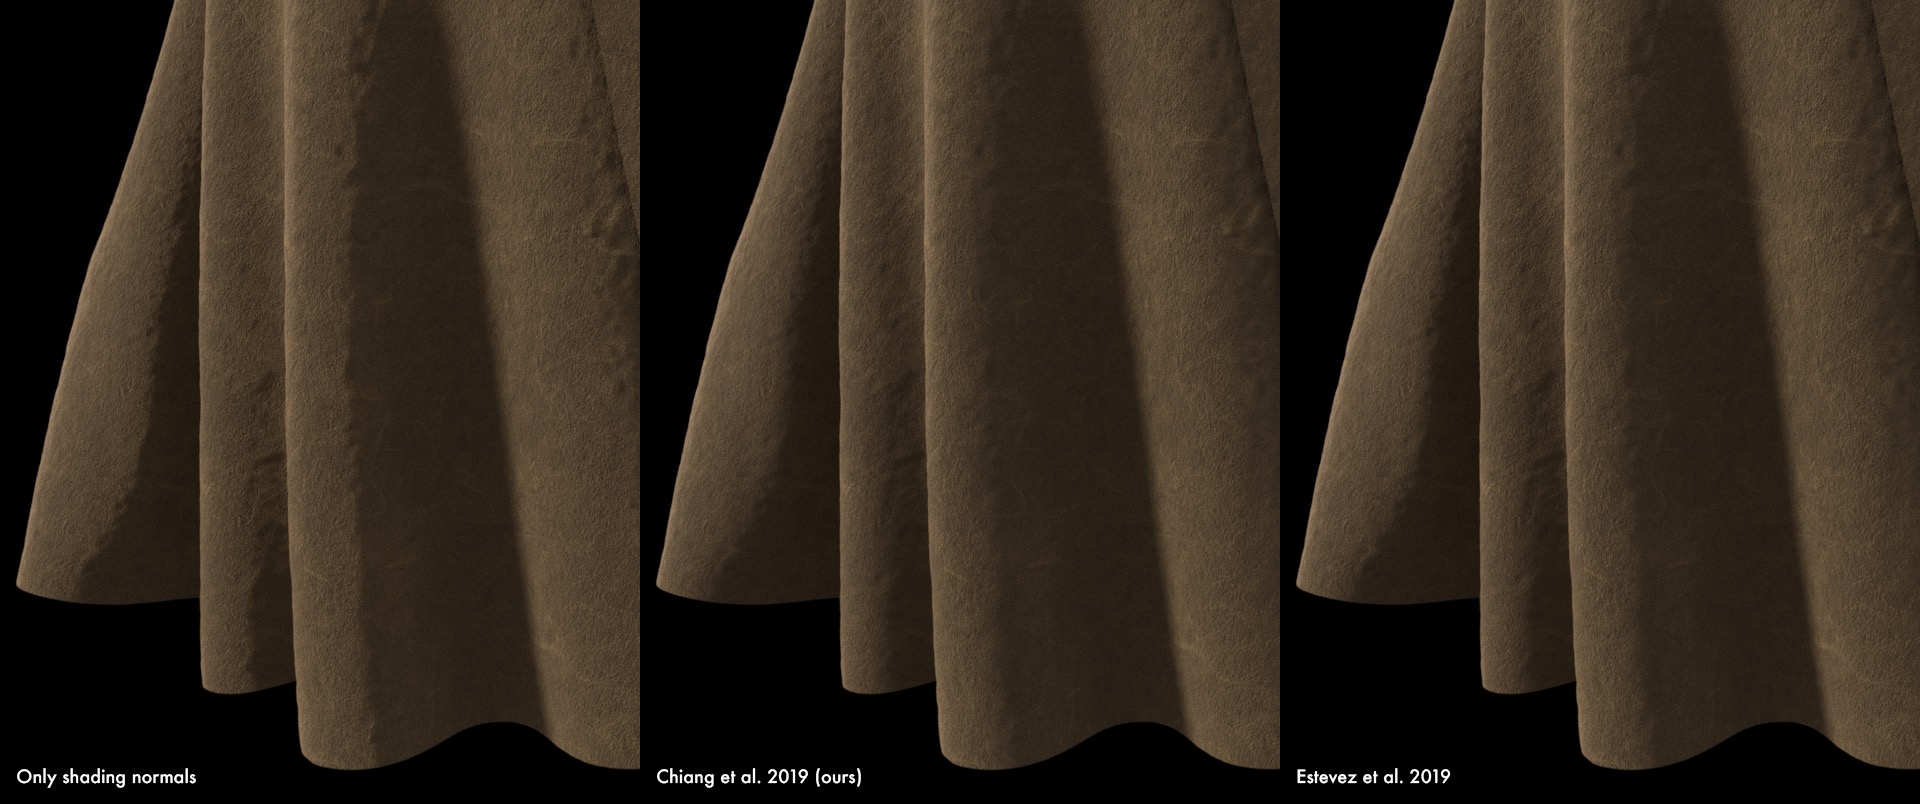 A higher-res version of Figure 1 from the paper: (left) <a href="https://blog.yiningkarlli.com/content/images/2019/Aug/header_shadingnormals.png">shading normals</a> exhibiting the harsh shadow terminator problem, (center) <a href="https://blog.yiningkarlli.com/content/images/2019/Aug/header_chiang.png">our technique</a>, and (right) <a href="https://blog.yiningkarlli.com/content/images/2019/Aug/header_estevez.png">Estevez et al.'s technique</a>.